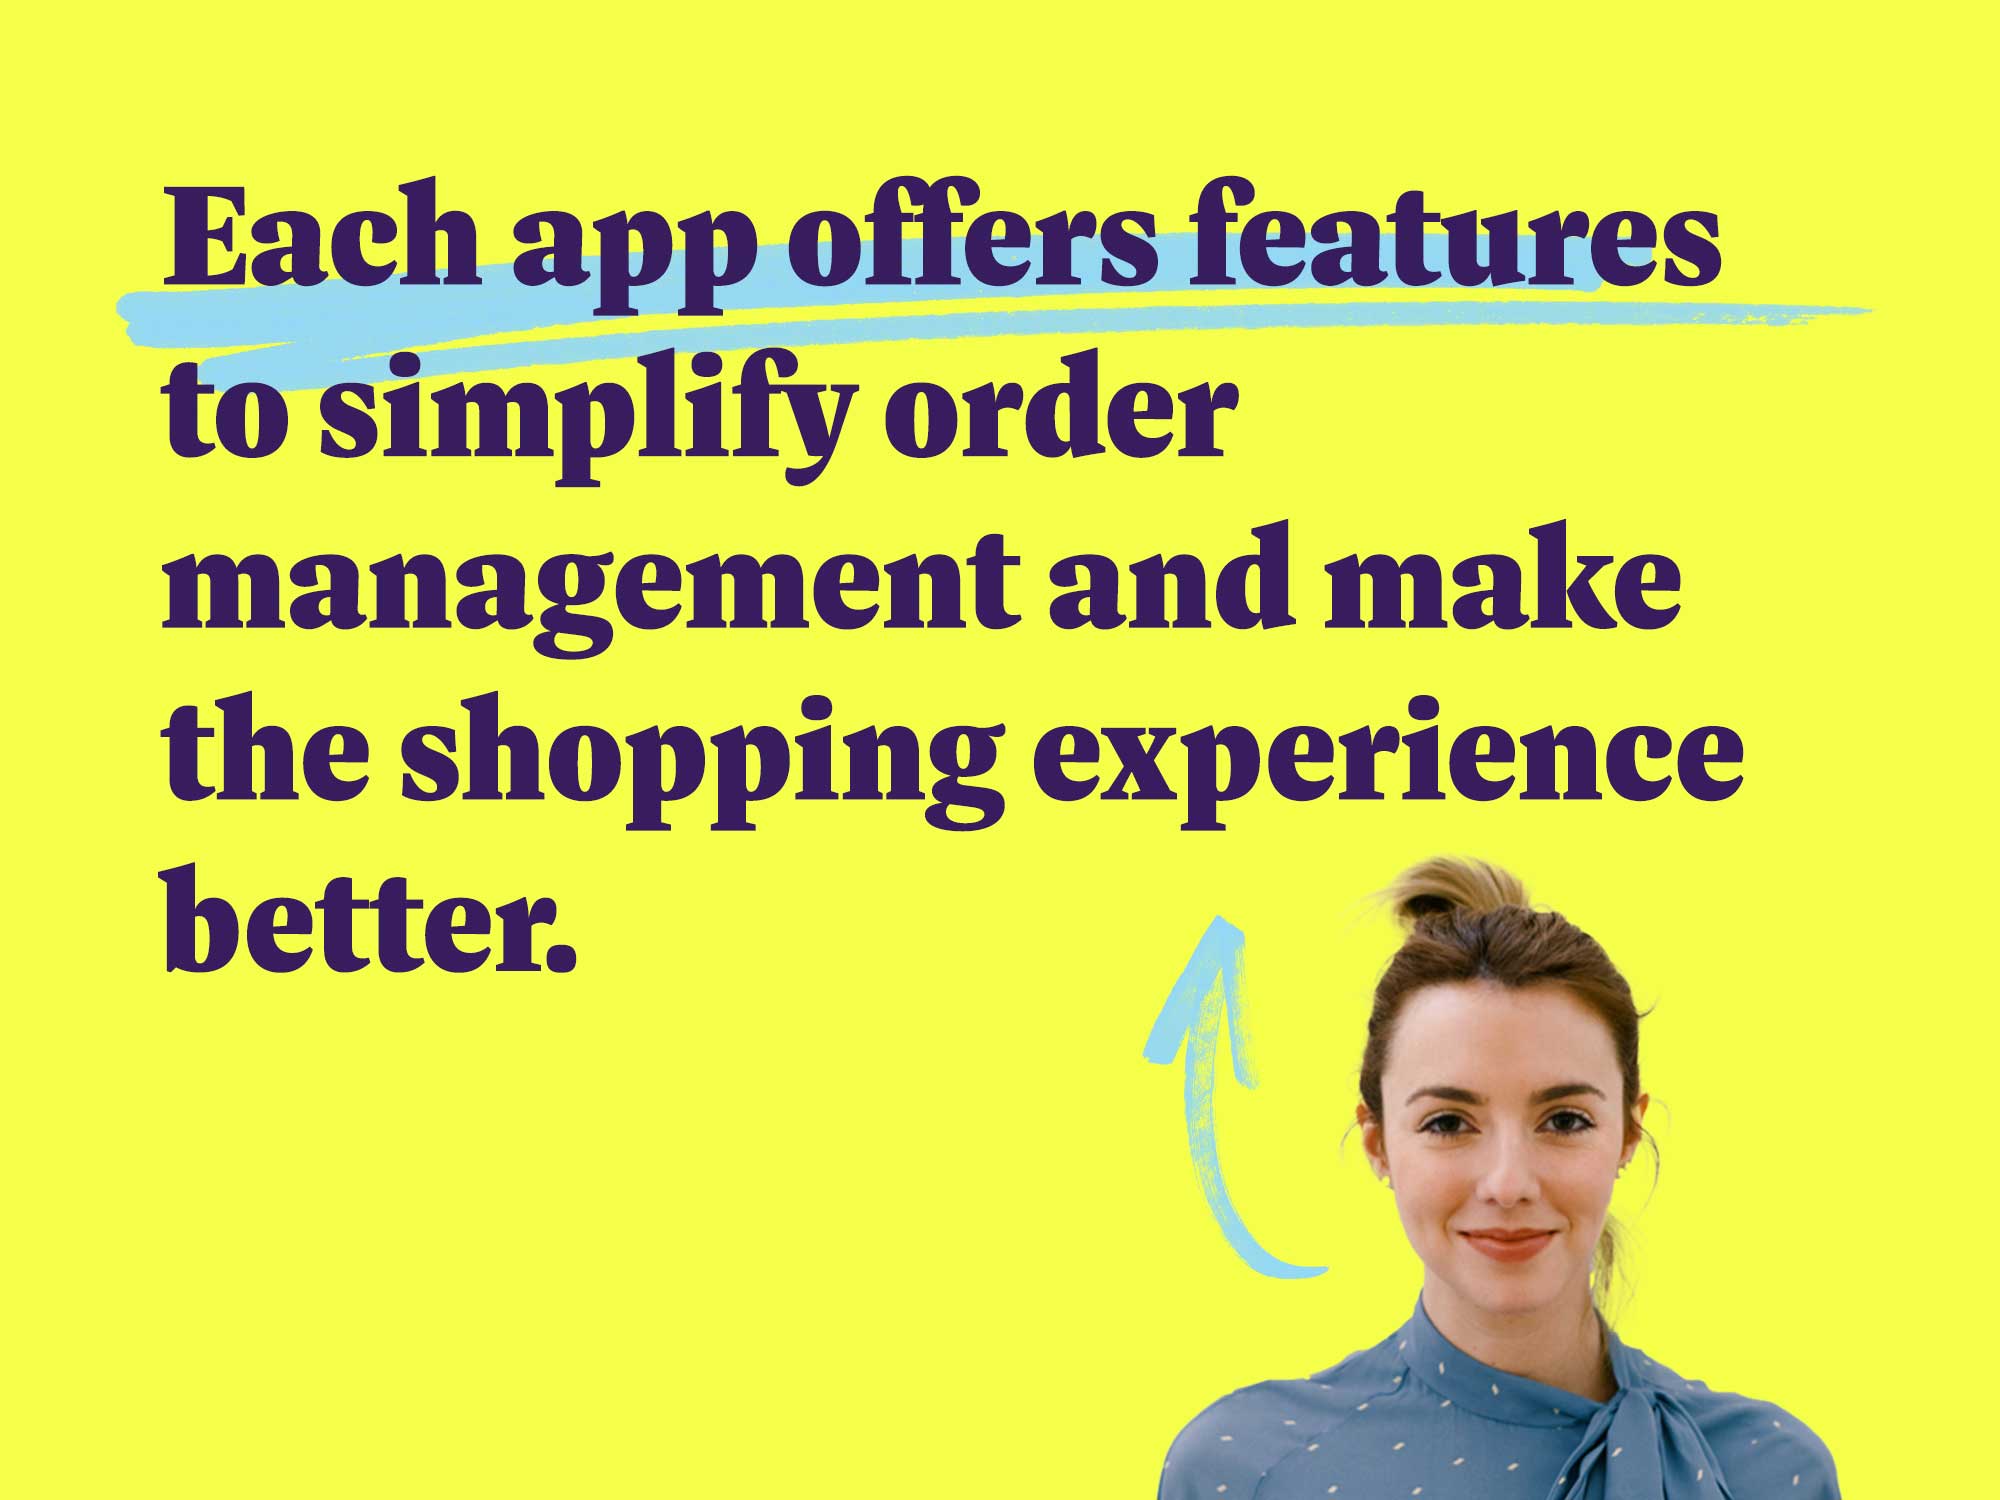 Each app offers features to simplify order management and make the shopping experience better.